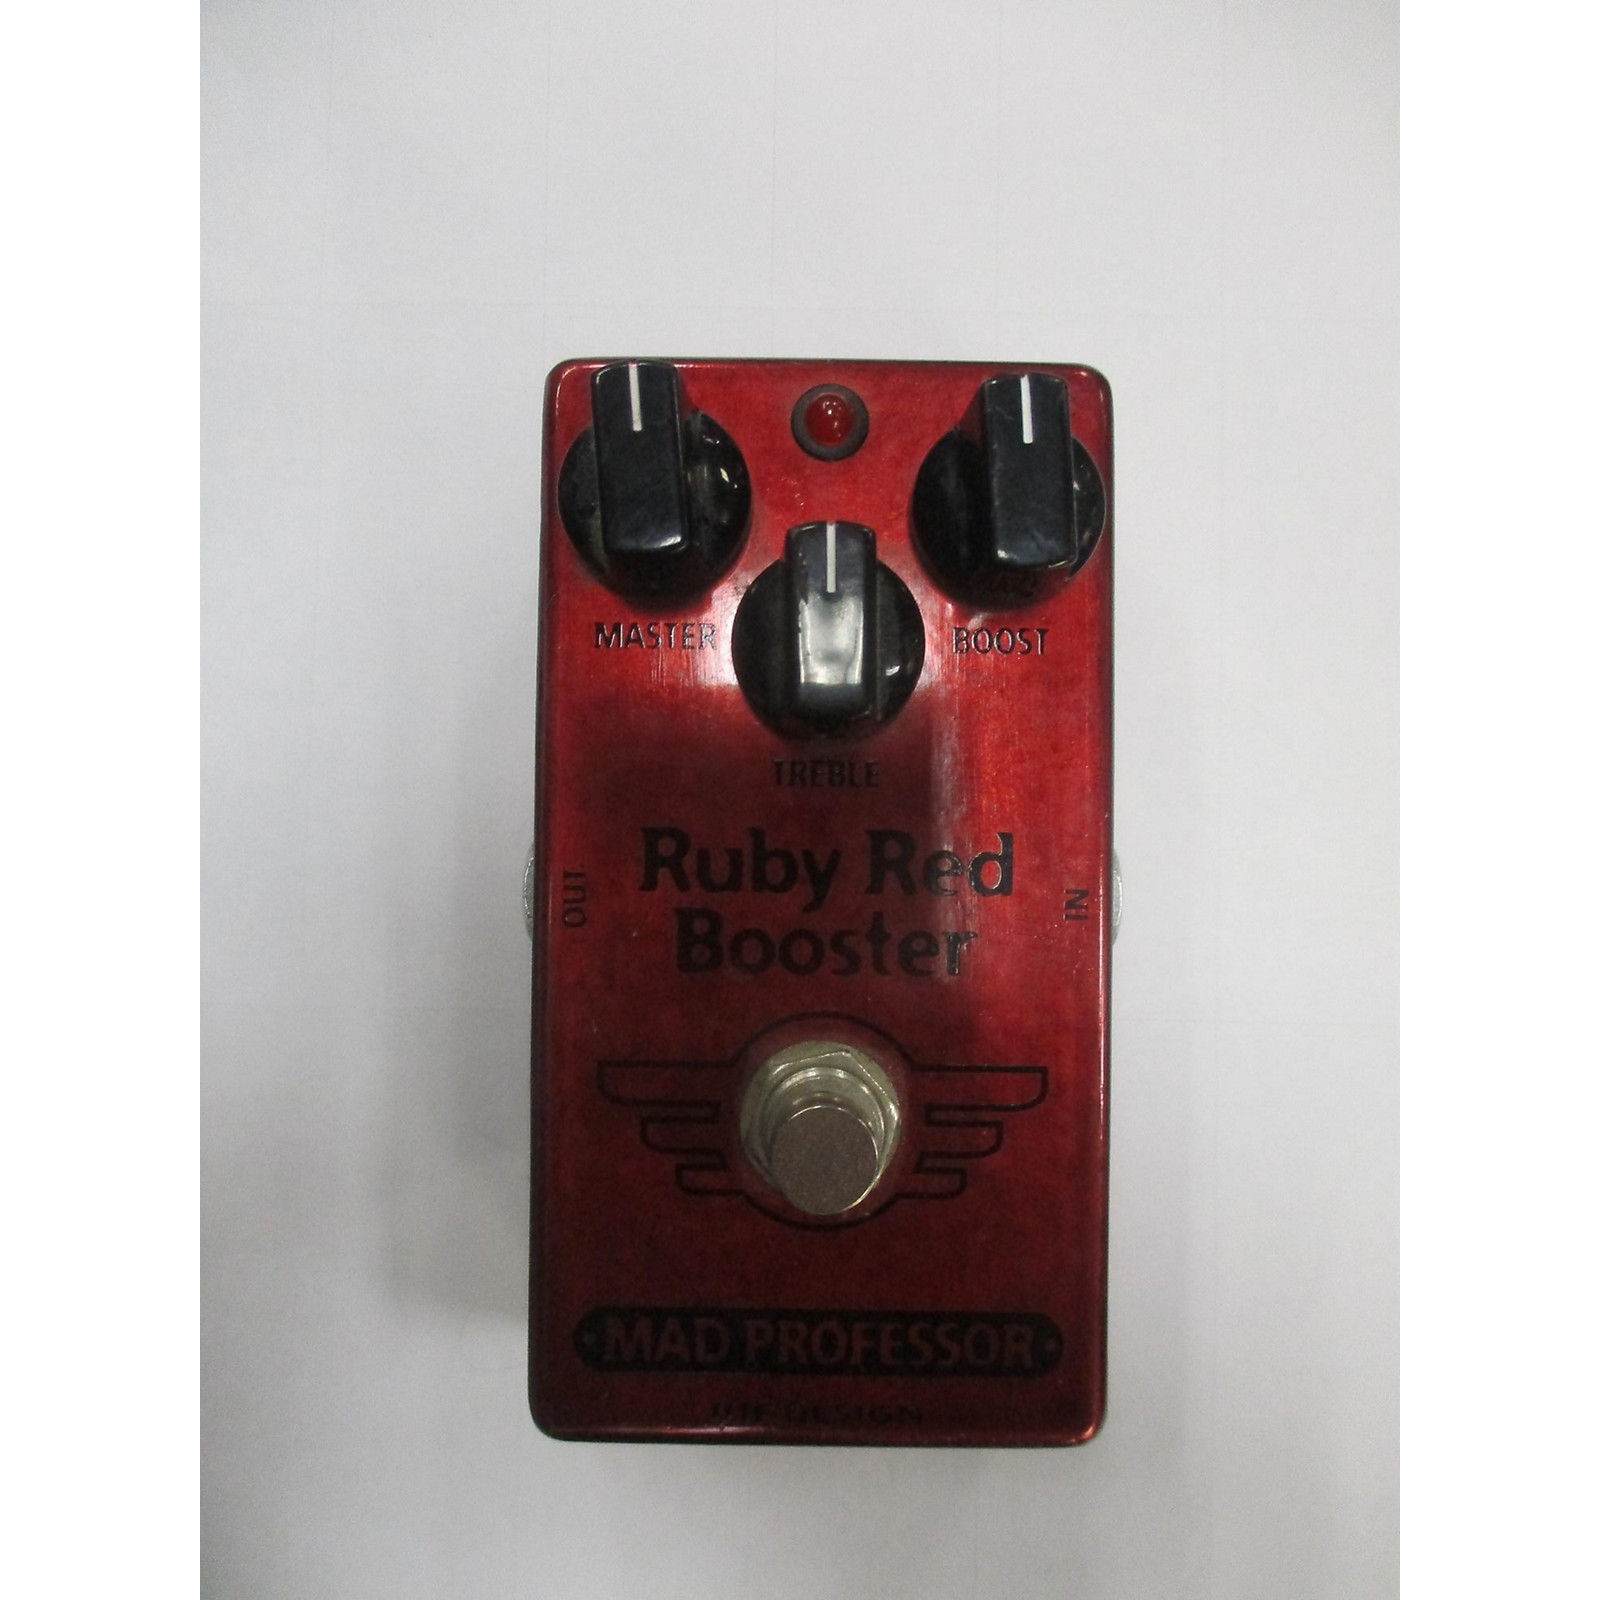 Used Mad Professor Ruby Red Booster Effect Pedal | Musician's Friend